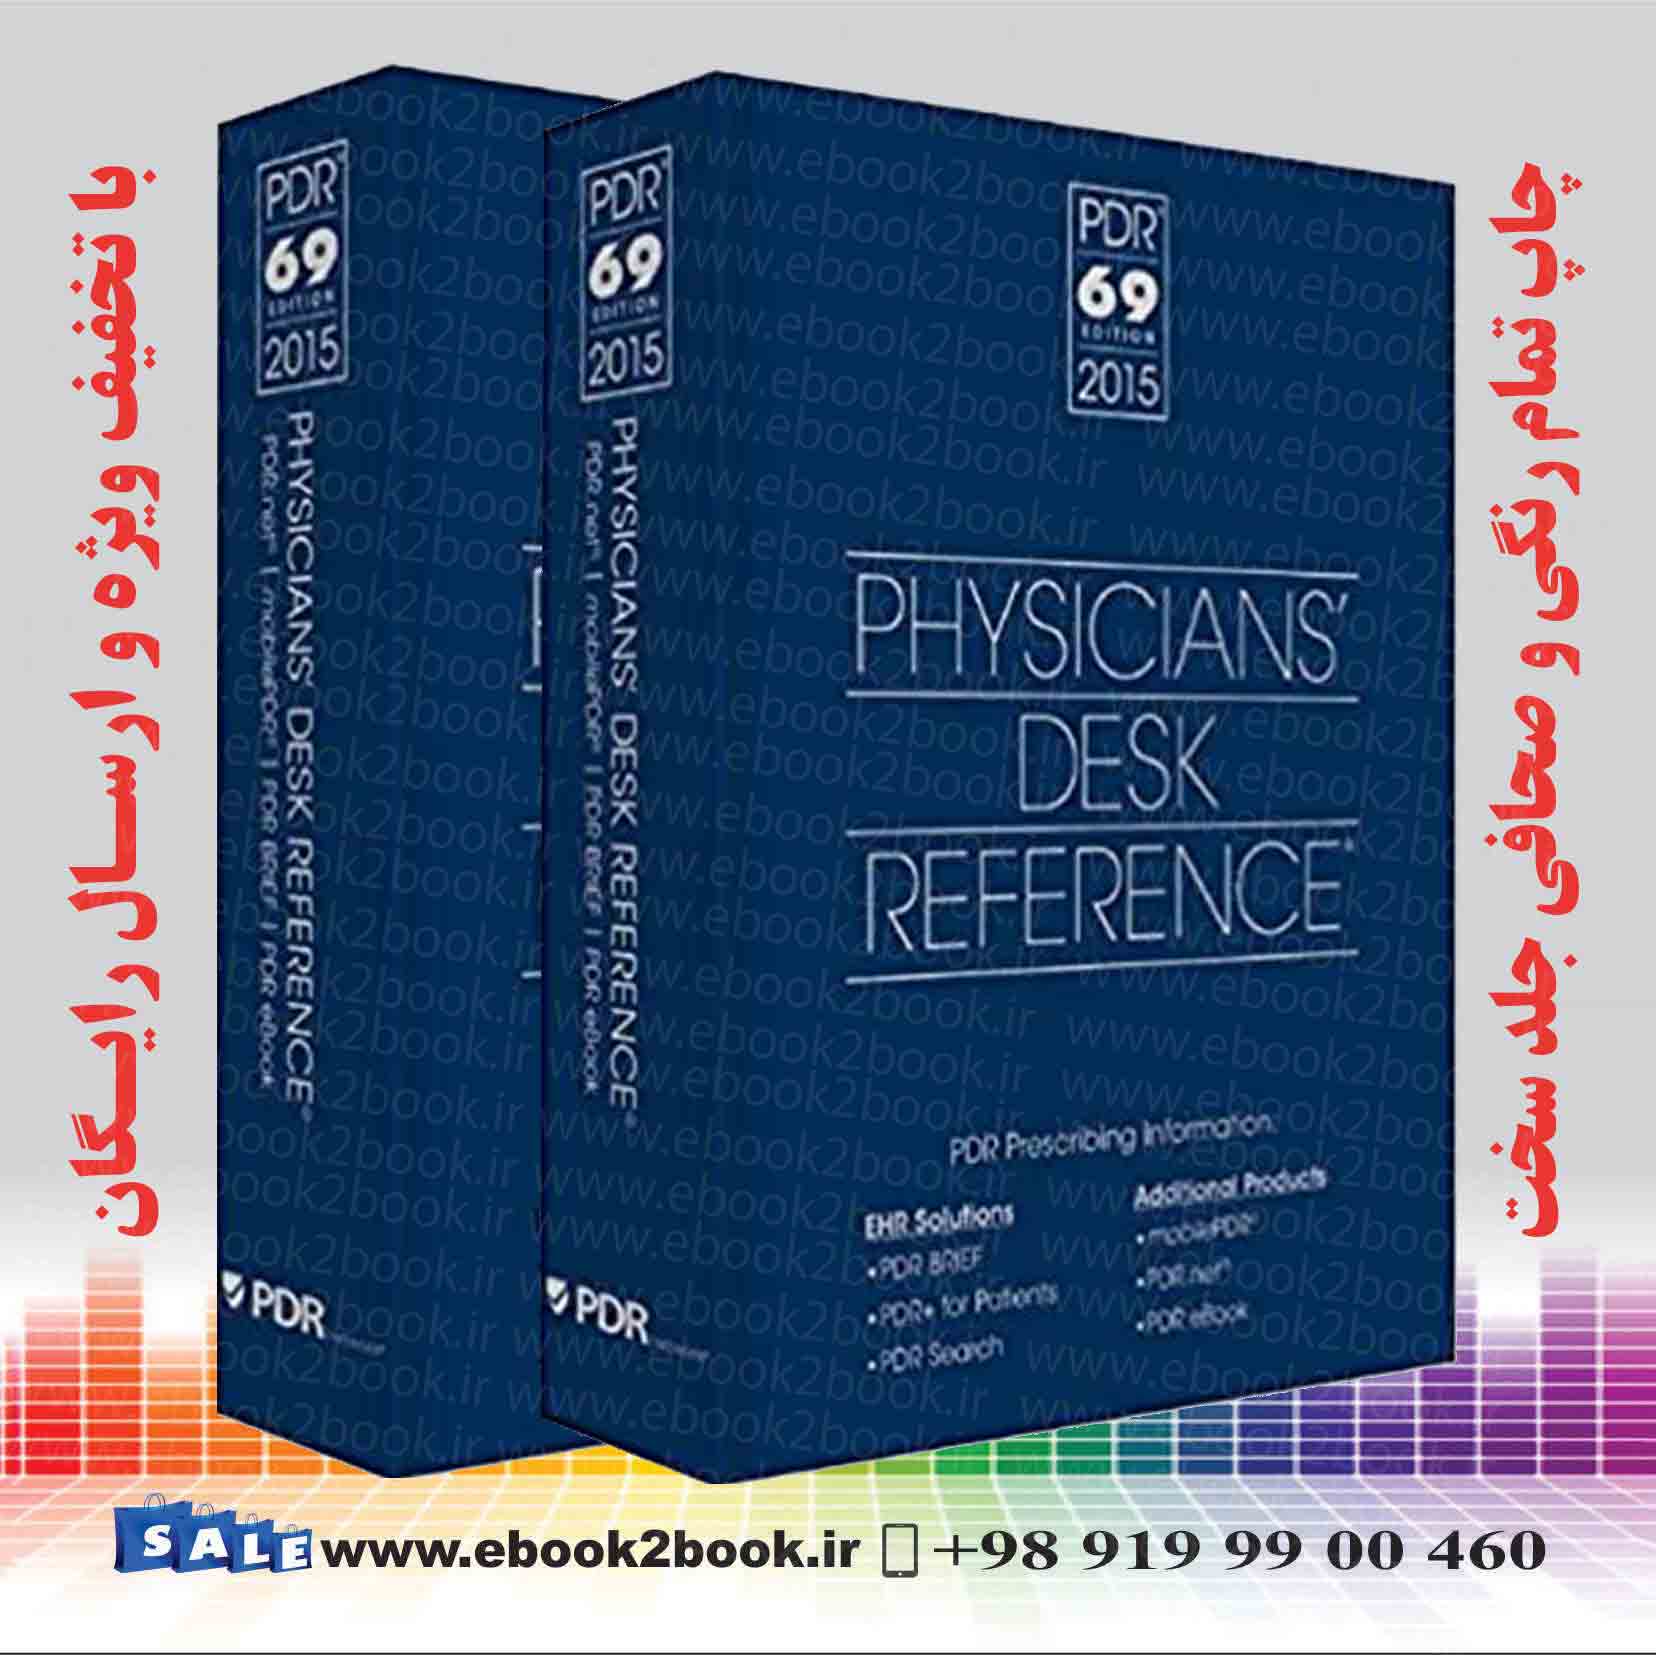 Physicians Desk Reference 69th Edition Physicians Desk